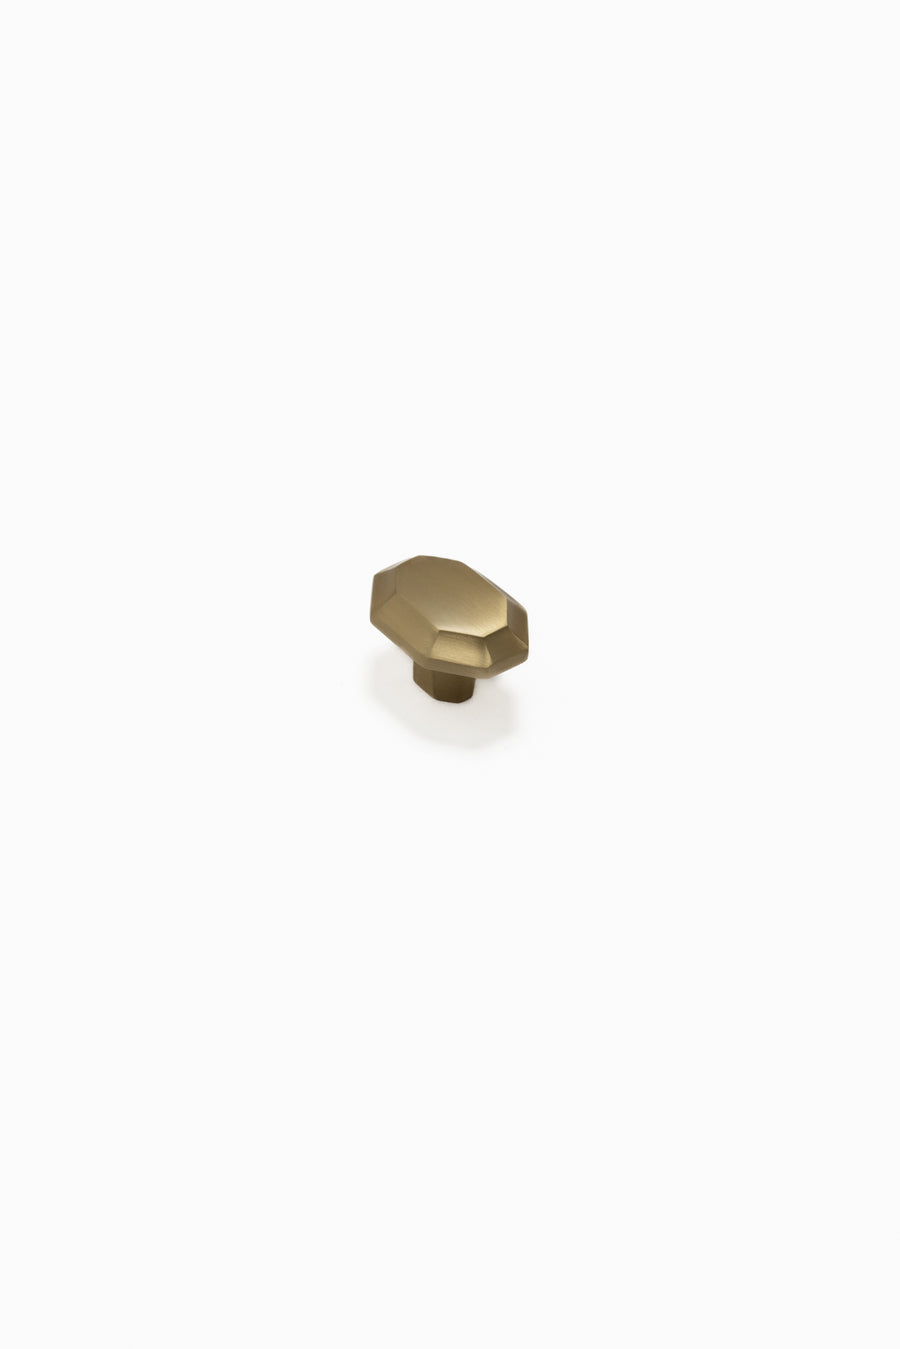 Archie Brass Geometric Cabinetry Knob - Little Swagger